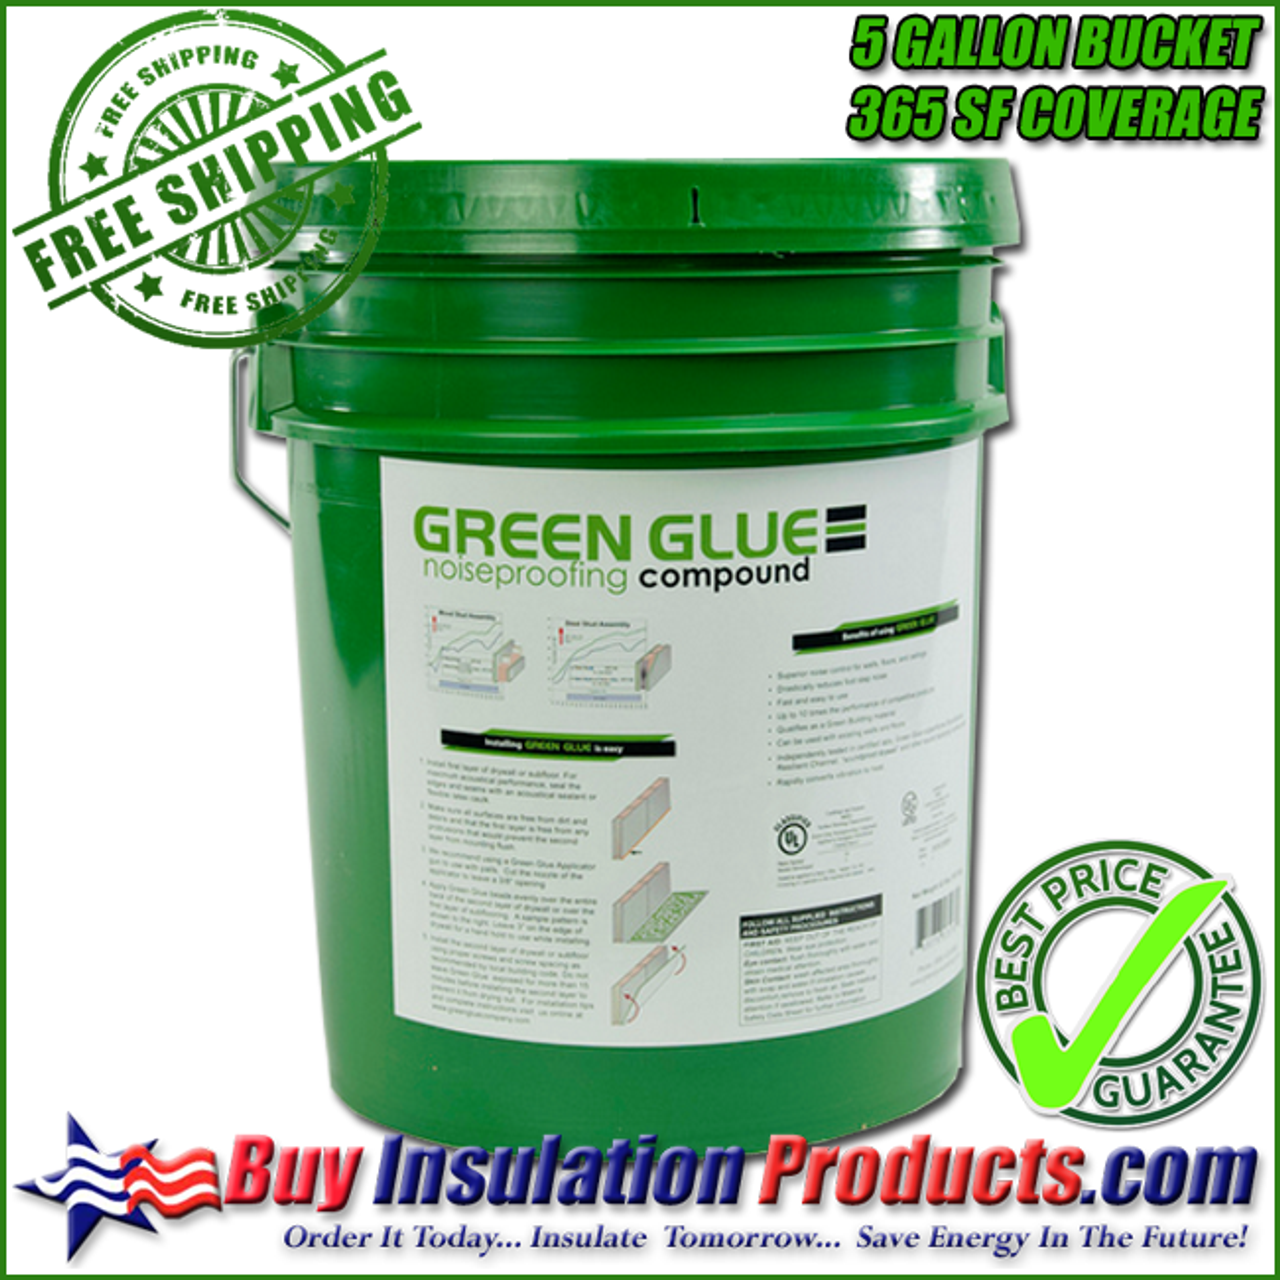 Green Glue Noiseproofing Compound - 5 Gallon Bucket / Pail